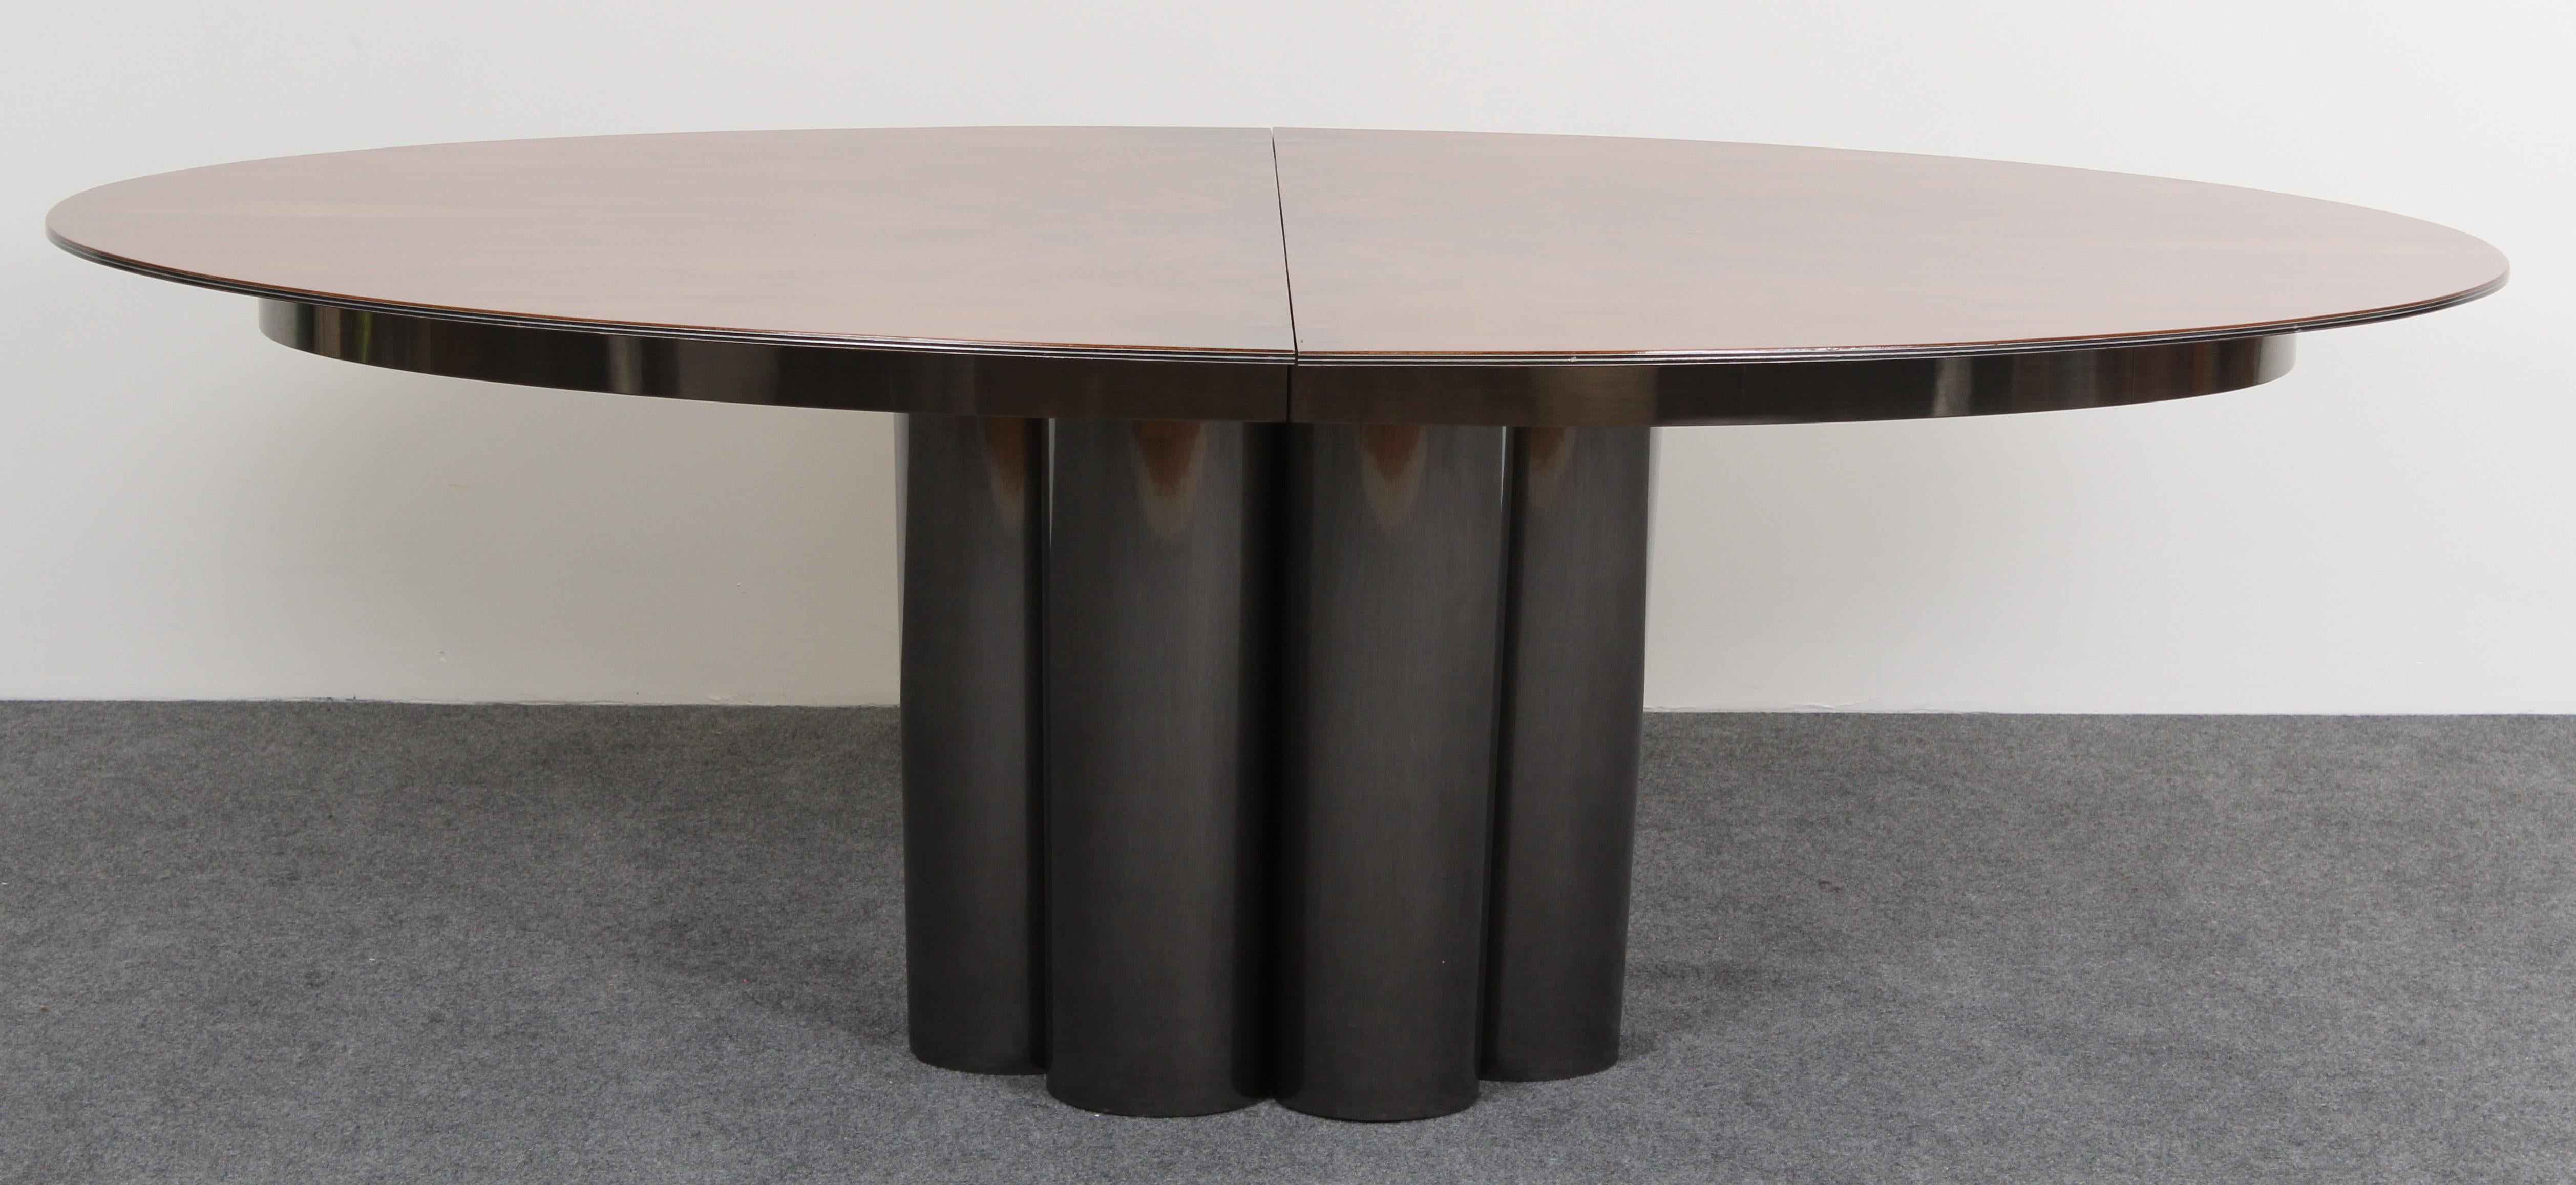 Late 20th Century Paul Evans Directional Oval Dining Table, 1975